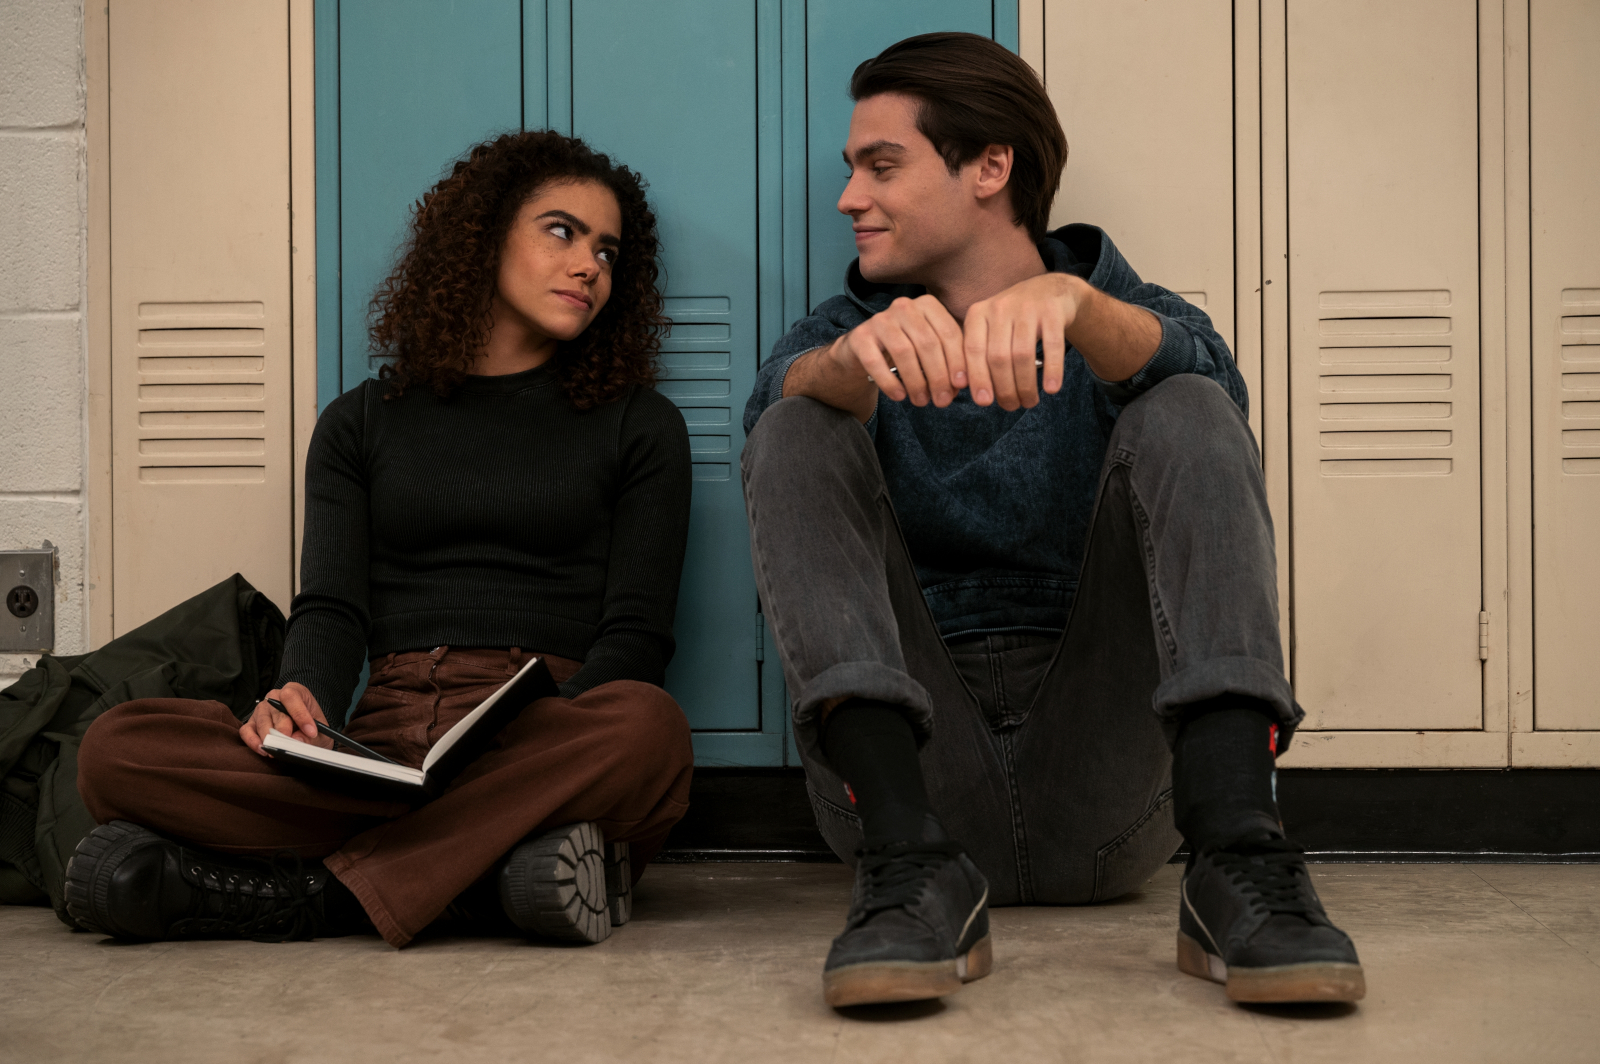 Antonia Gentry as Ginny and Felix Mallard as Marcus Baker in 'Ginny and Georgia' Season 2 for our article about its release date, cast, and trailer. The pair are leaning against their lockers and looking at one another.